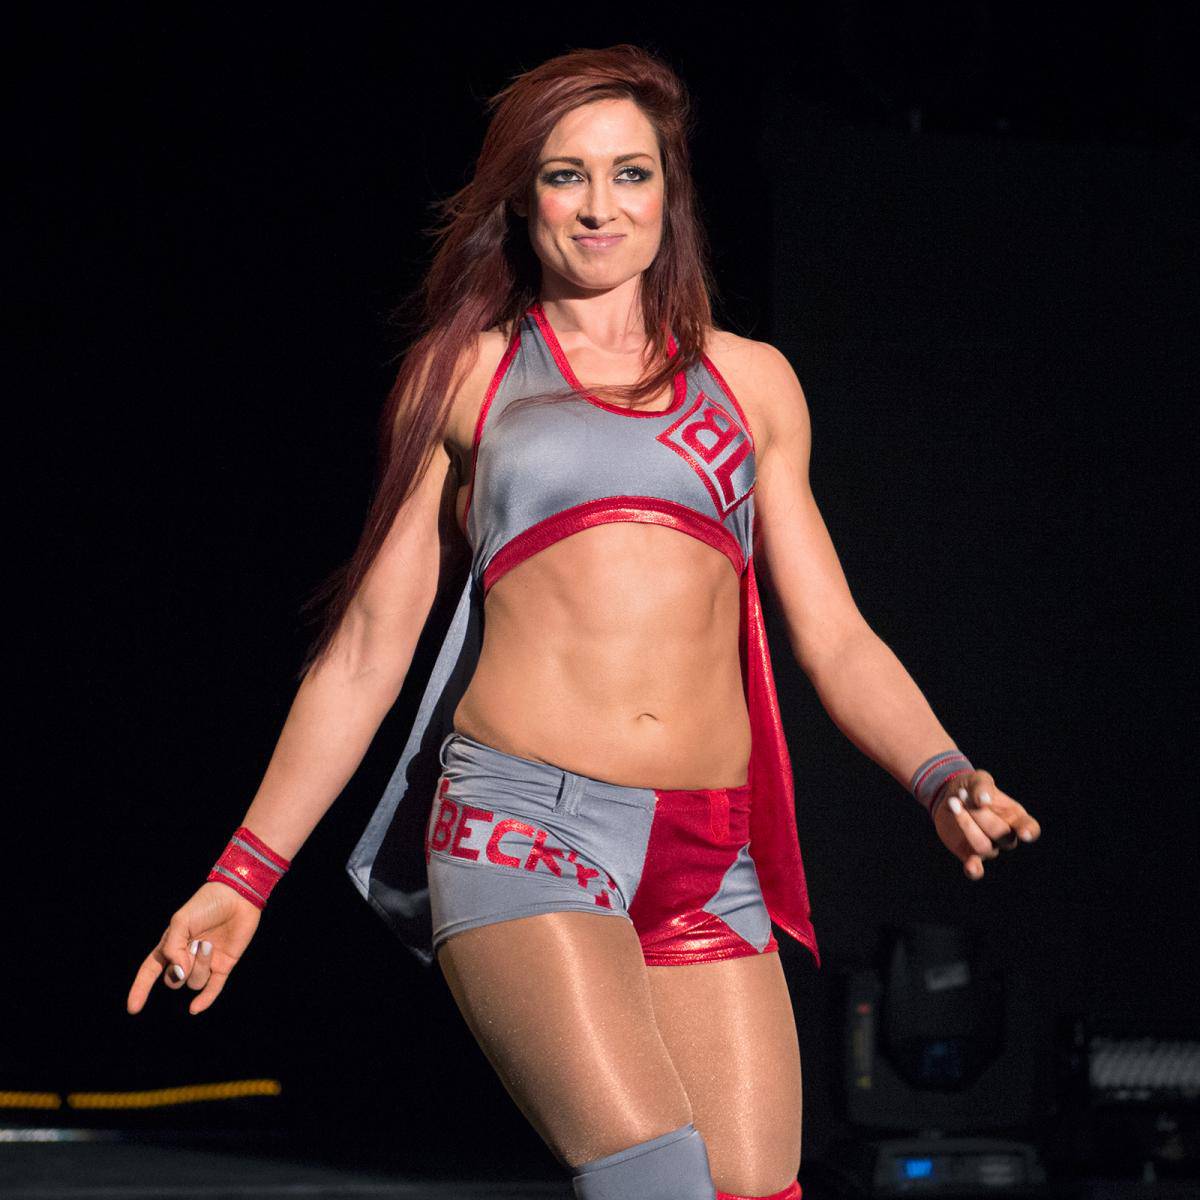 Day 96 of missing Becky Lynch from our screens!